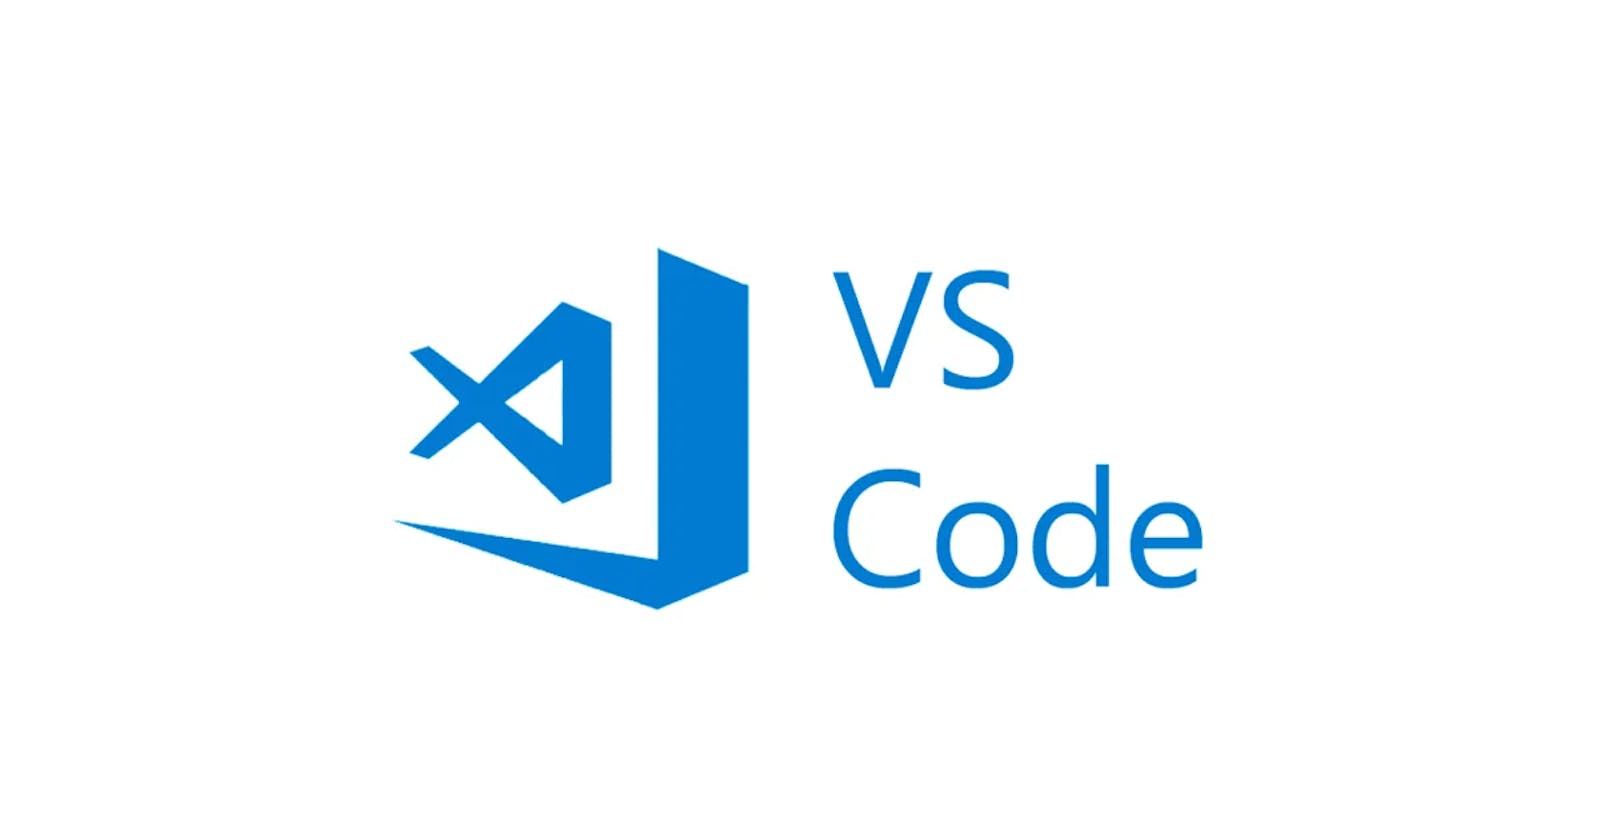 20 VS Code Extensions to make you Web Development journey more fascinating